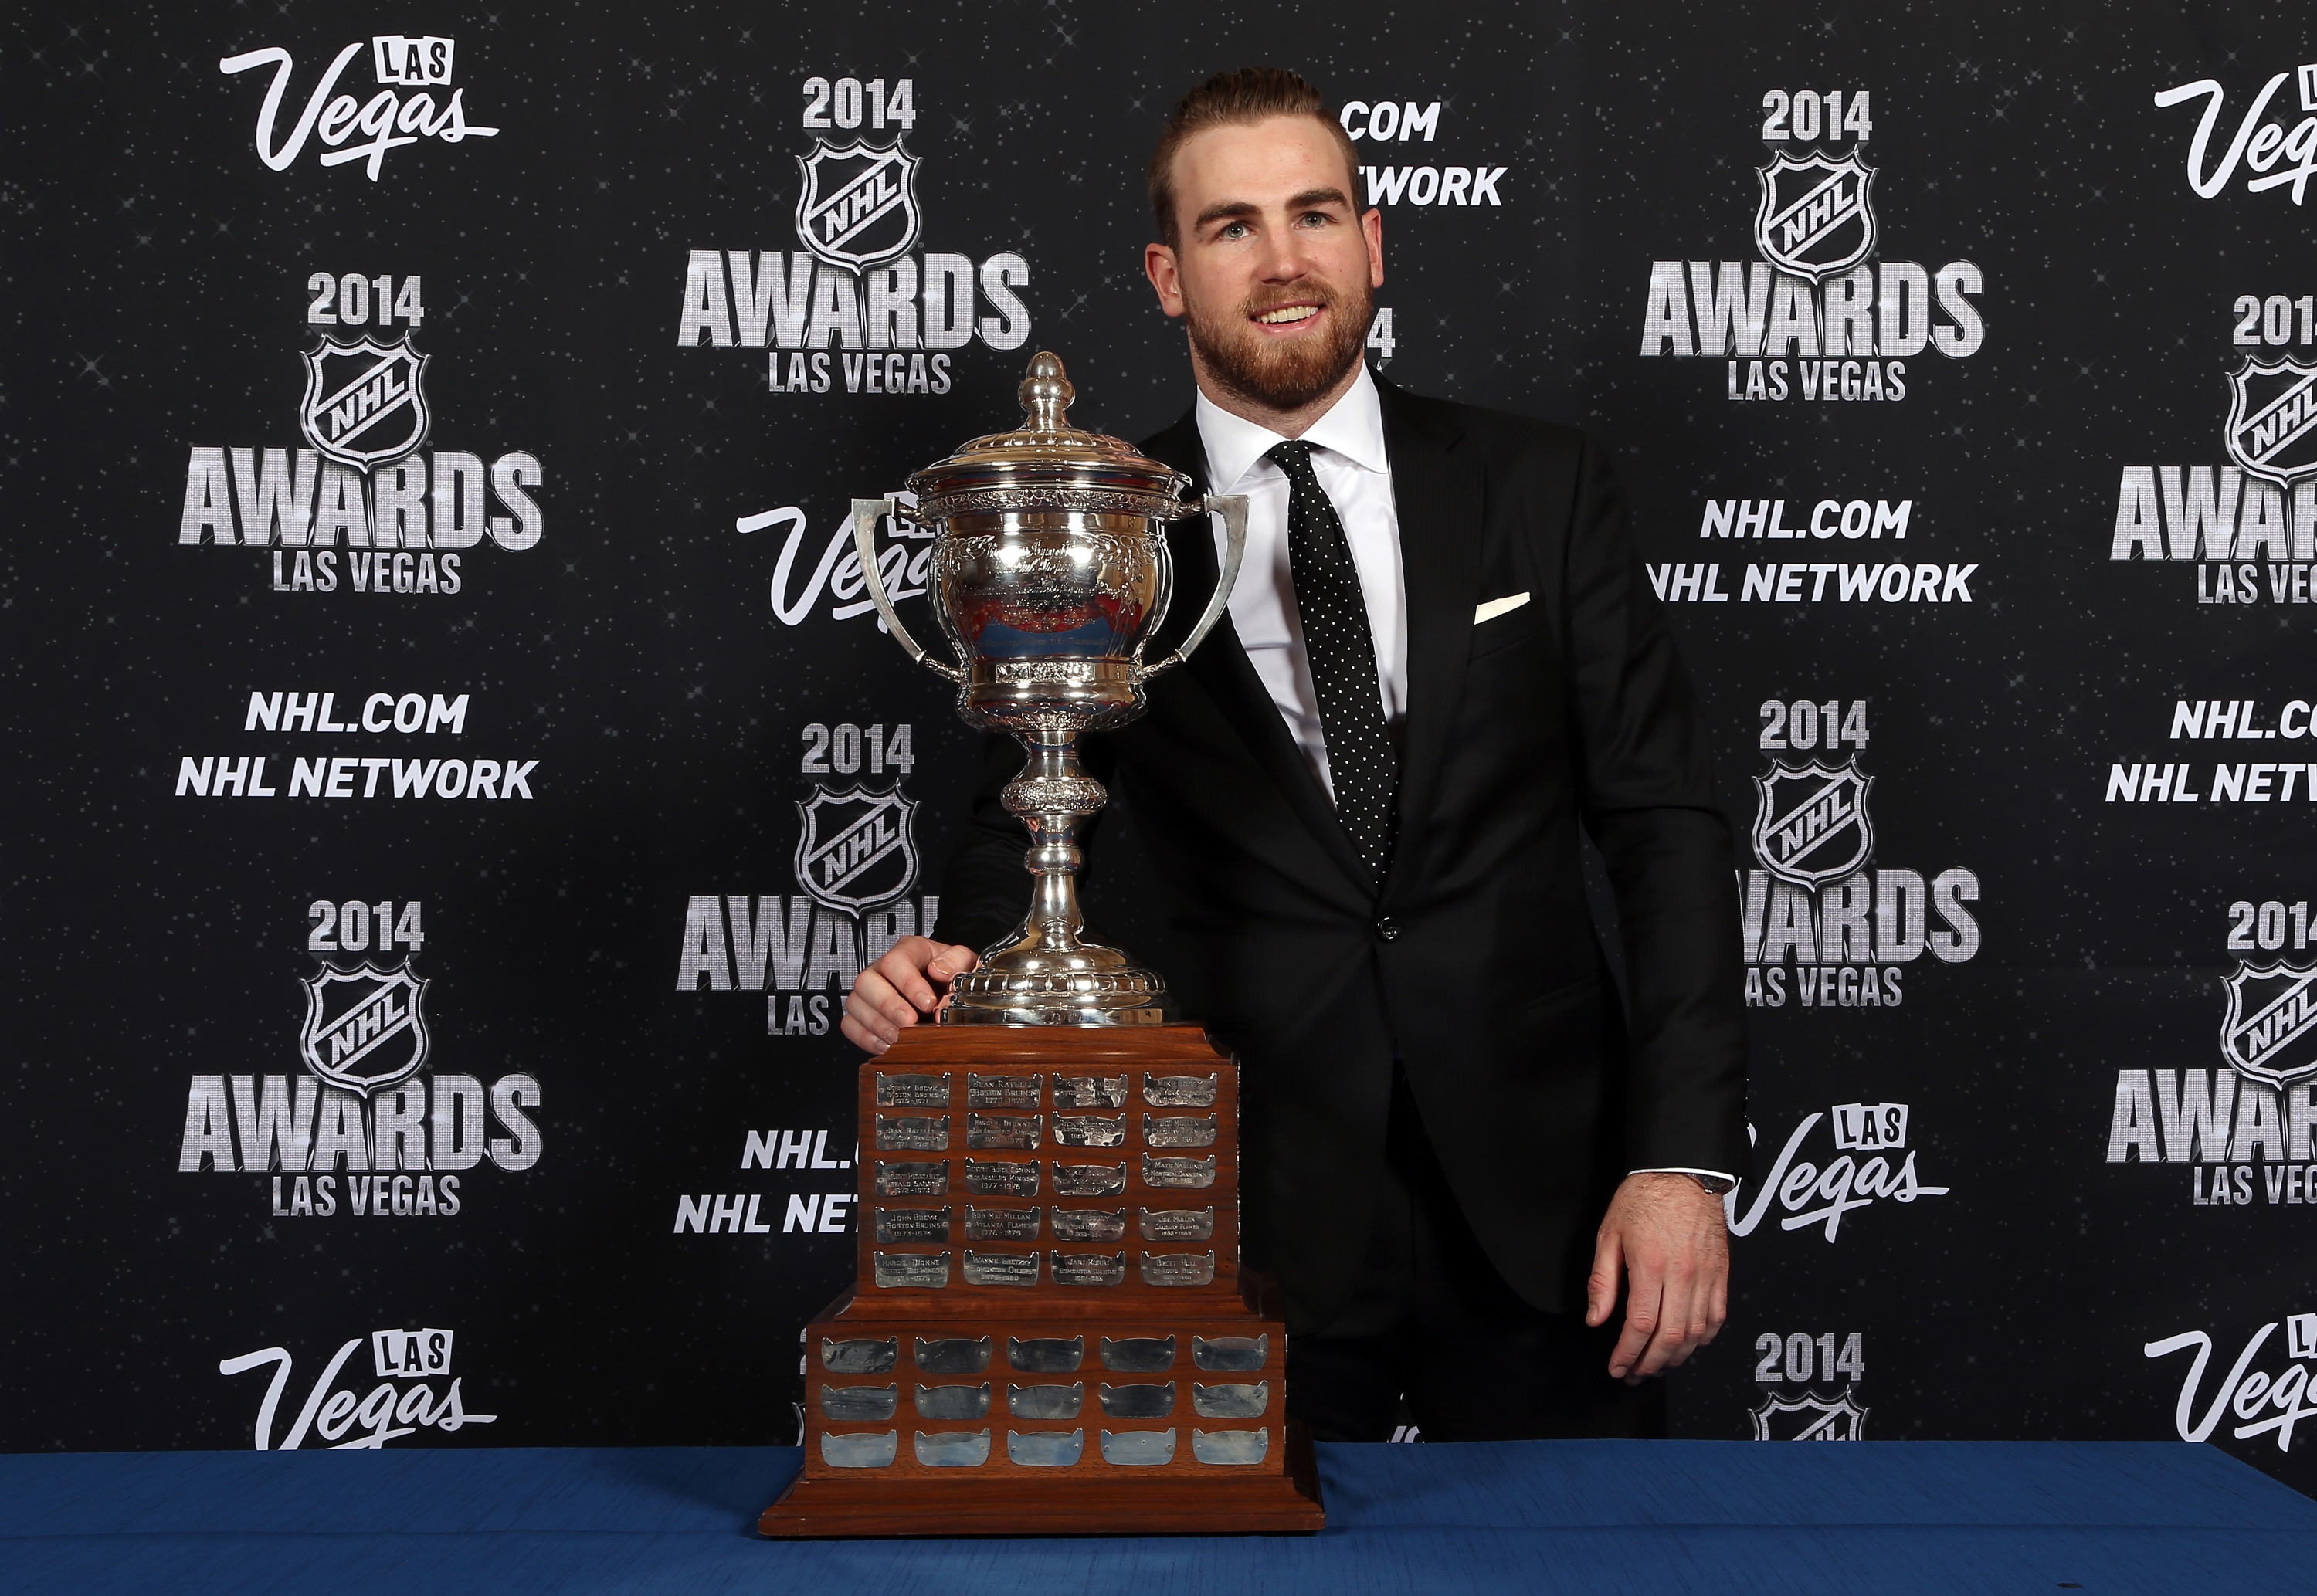 LAS VEGAS, NV - JUNE 24: Ryan O'Reilly of the Colorado Avalanche poses after winning the Lady Byng Memorial Trophy during the 2014 NHL Awards at the Encore Theater at Wynn Las Vegas on June 24, 2014 in Las Vegas, Nevada. (Photo by Bruce Bennett/Getty Images)